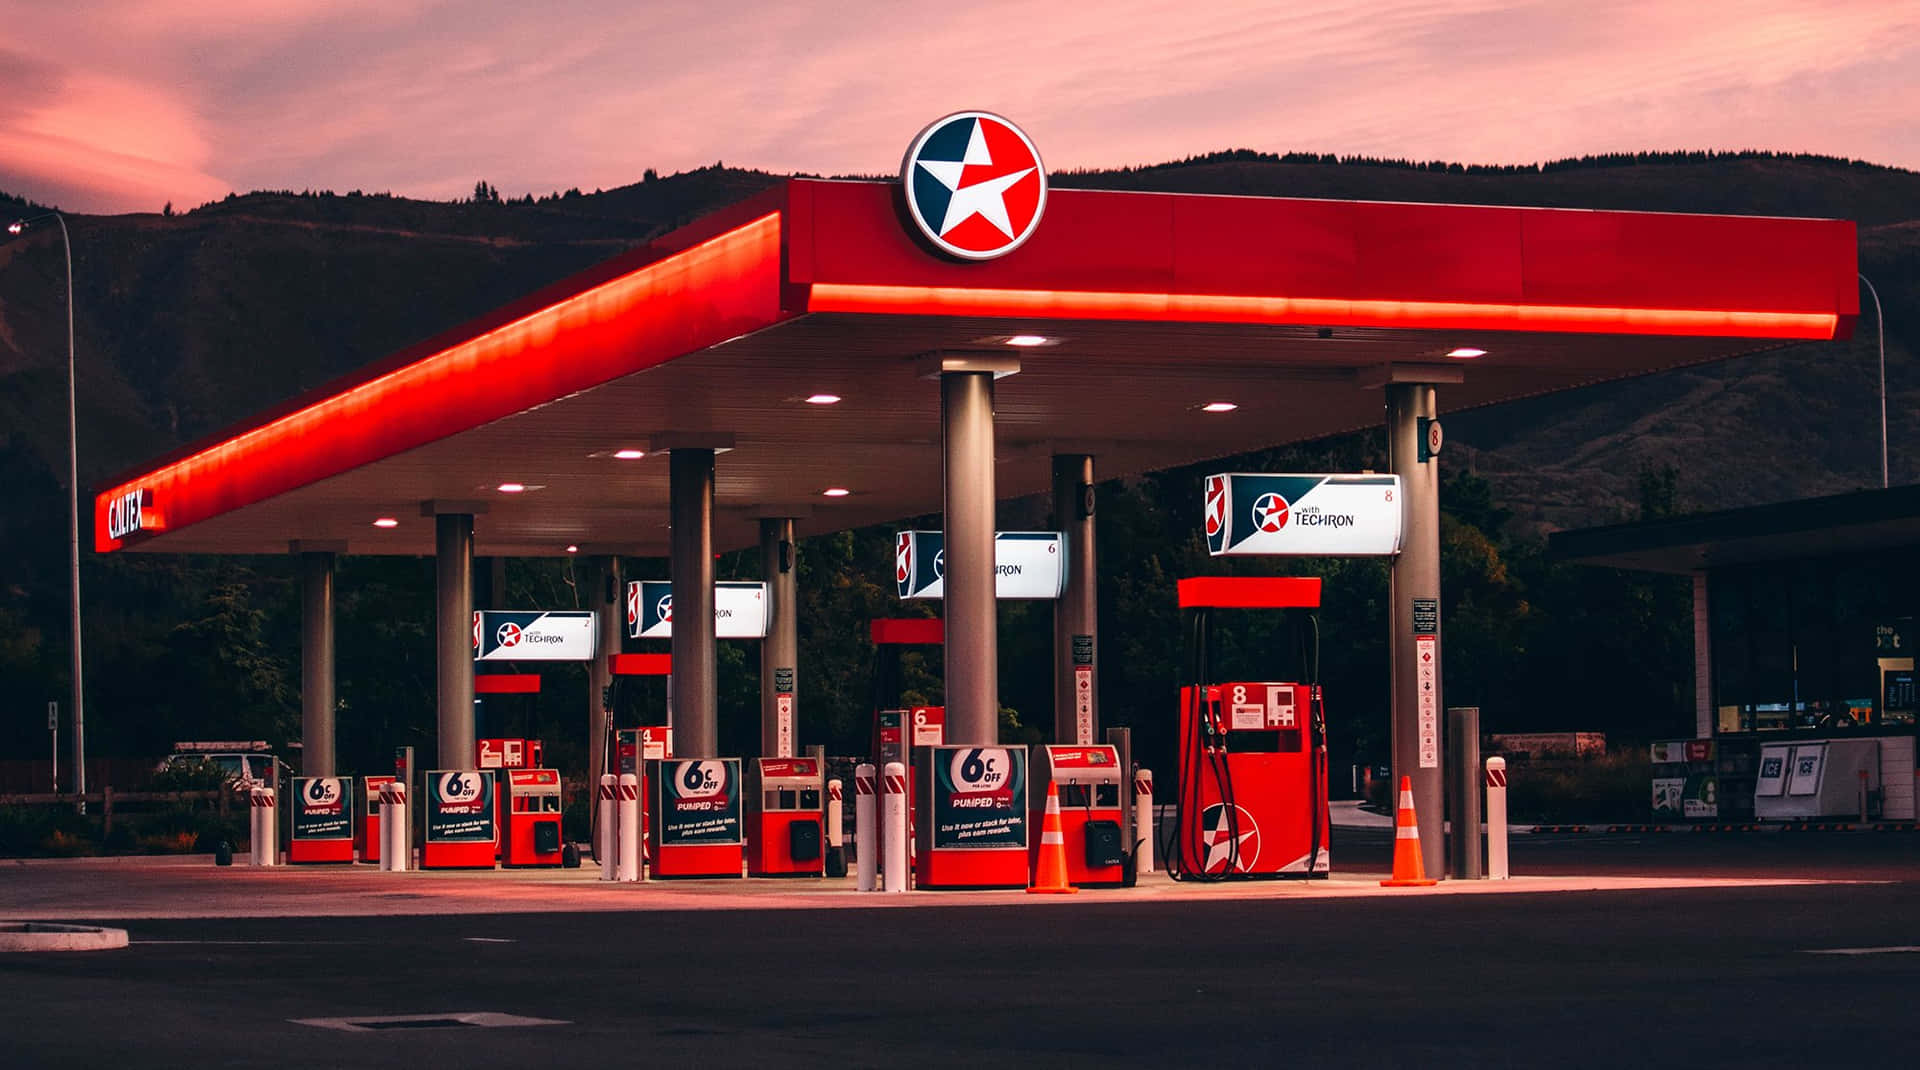 A modern petrol station providing convenience to drivers